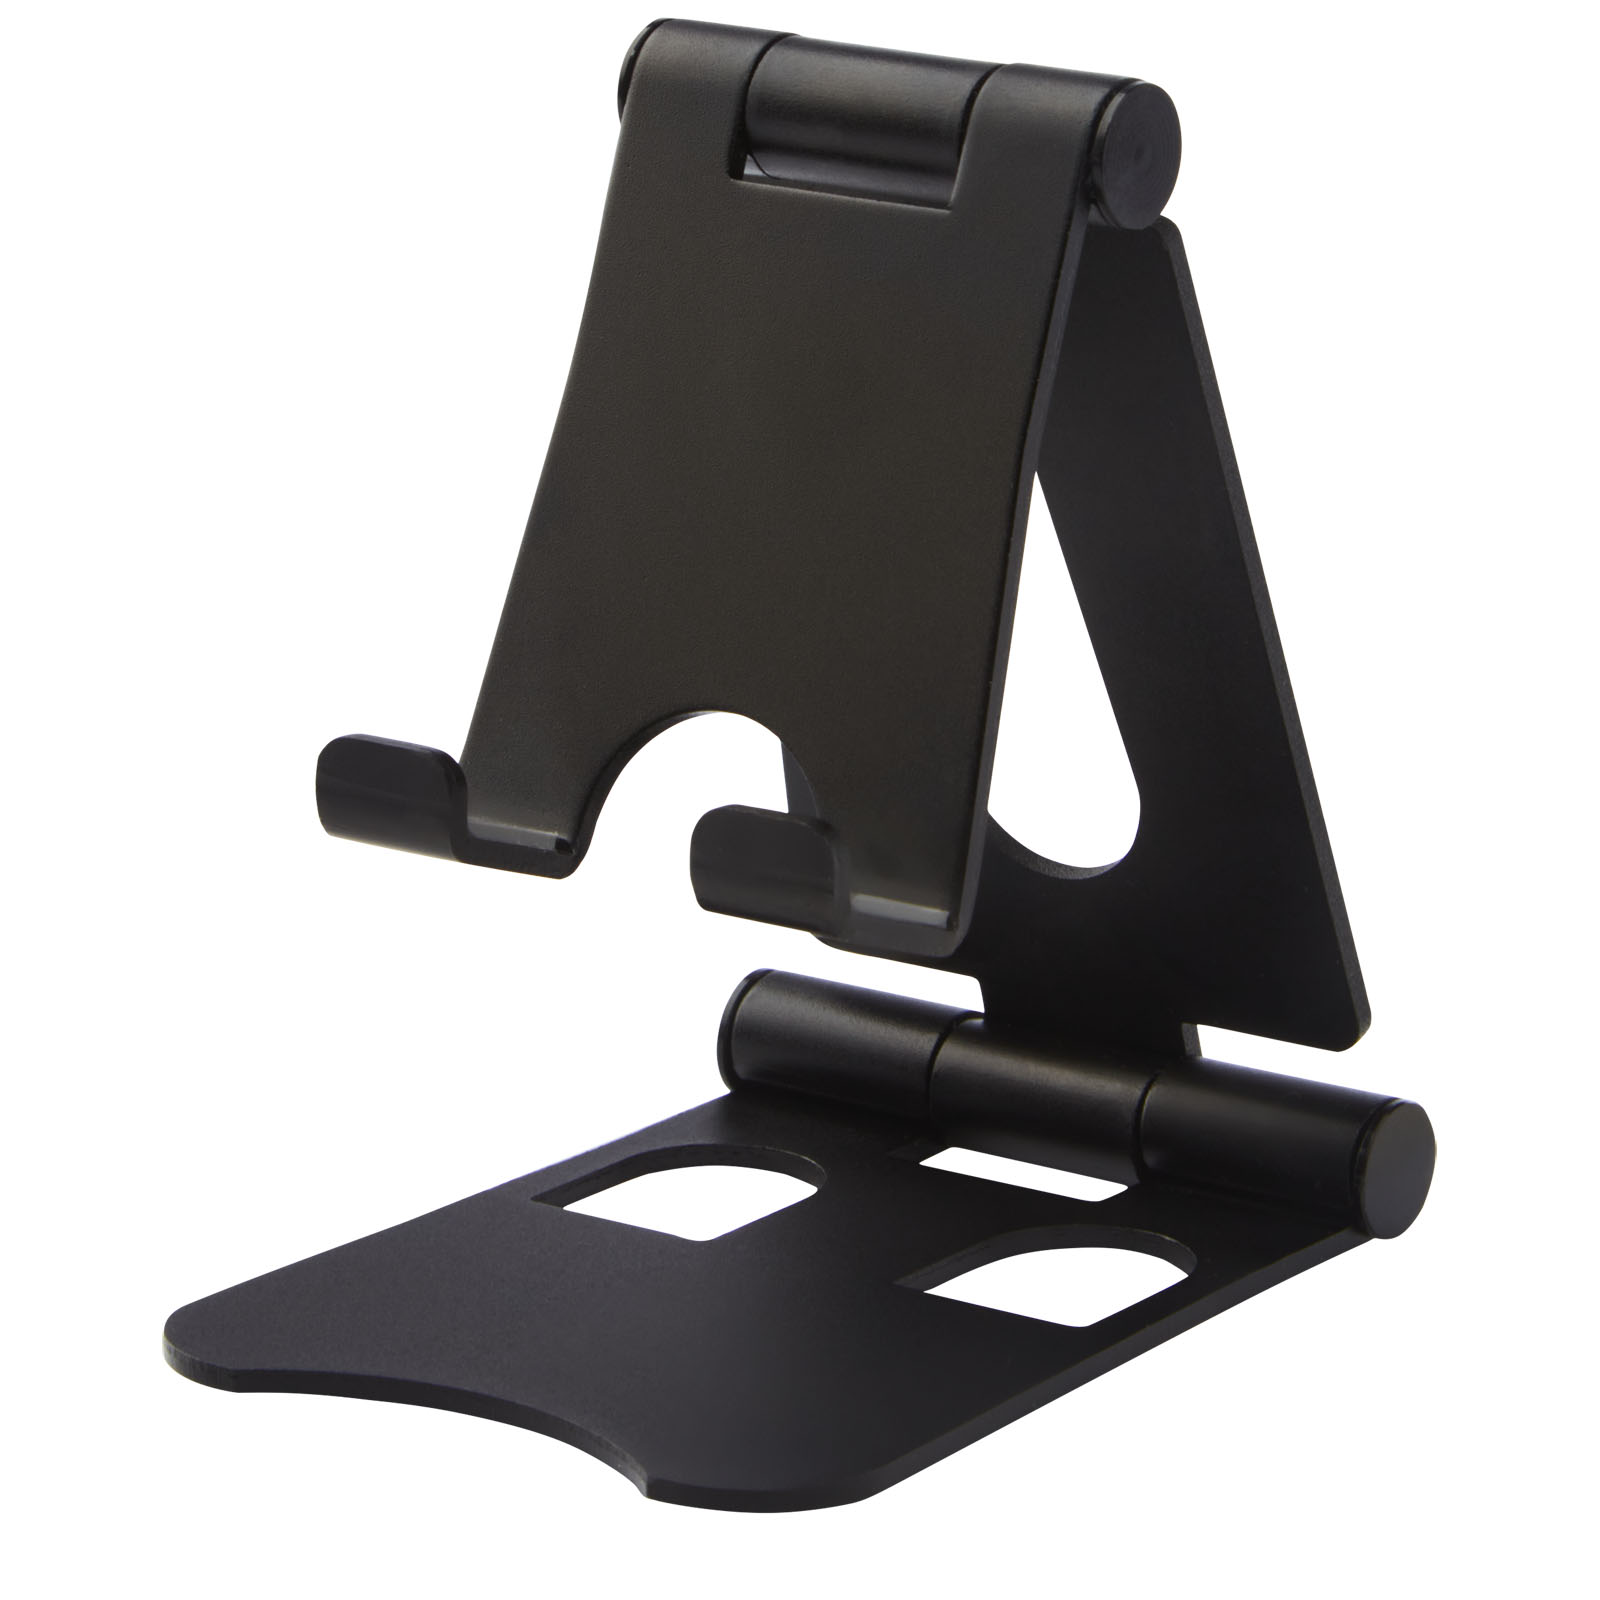 Advertising Stands & Holders - Rise foldable phone stand - 4